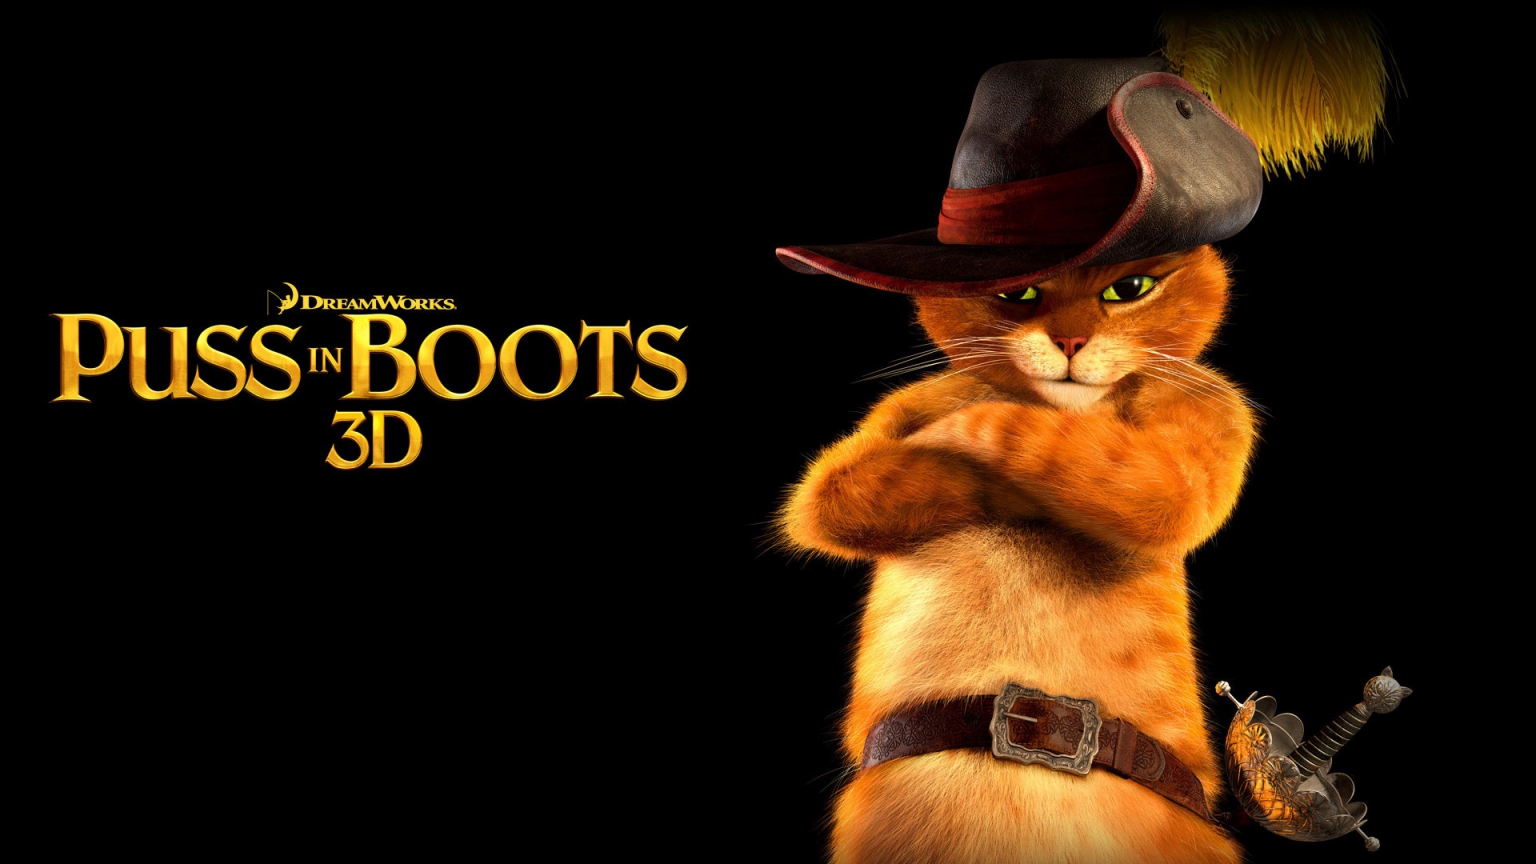 Puss in Boots 3D for 1536 x 864 HDTV resolution